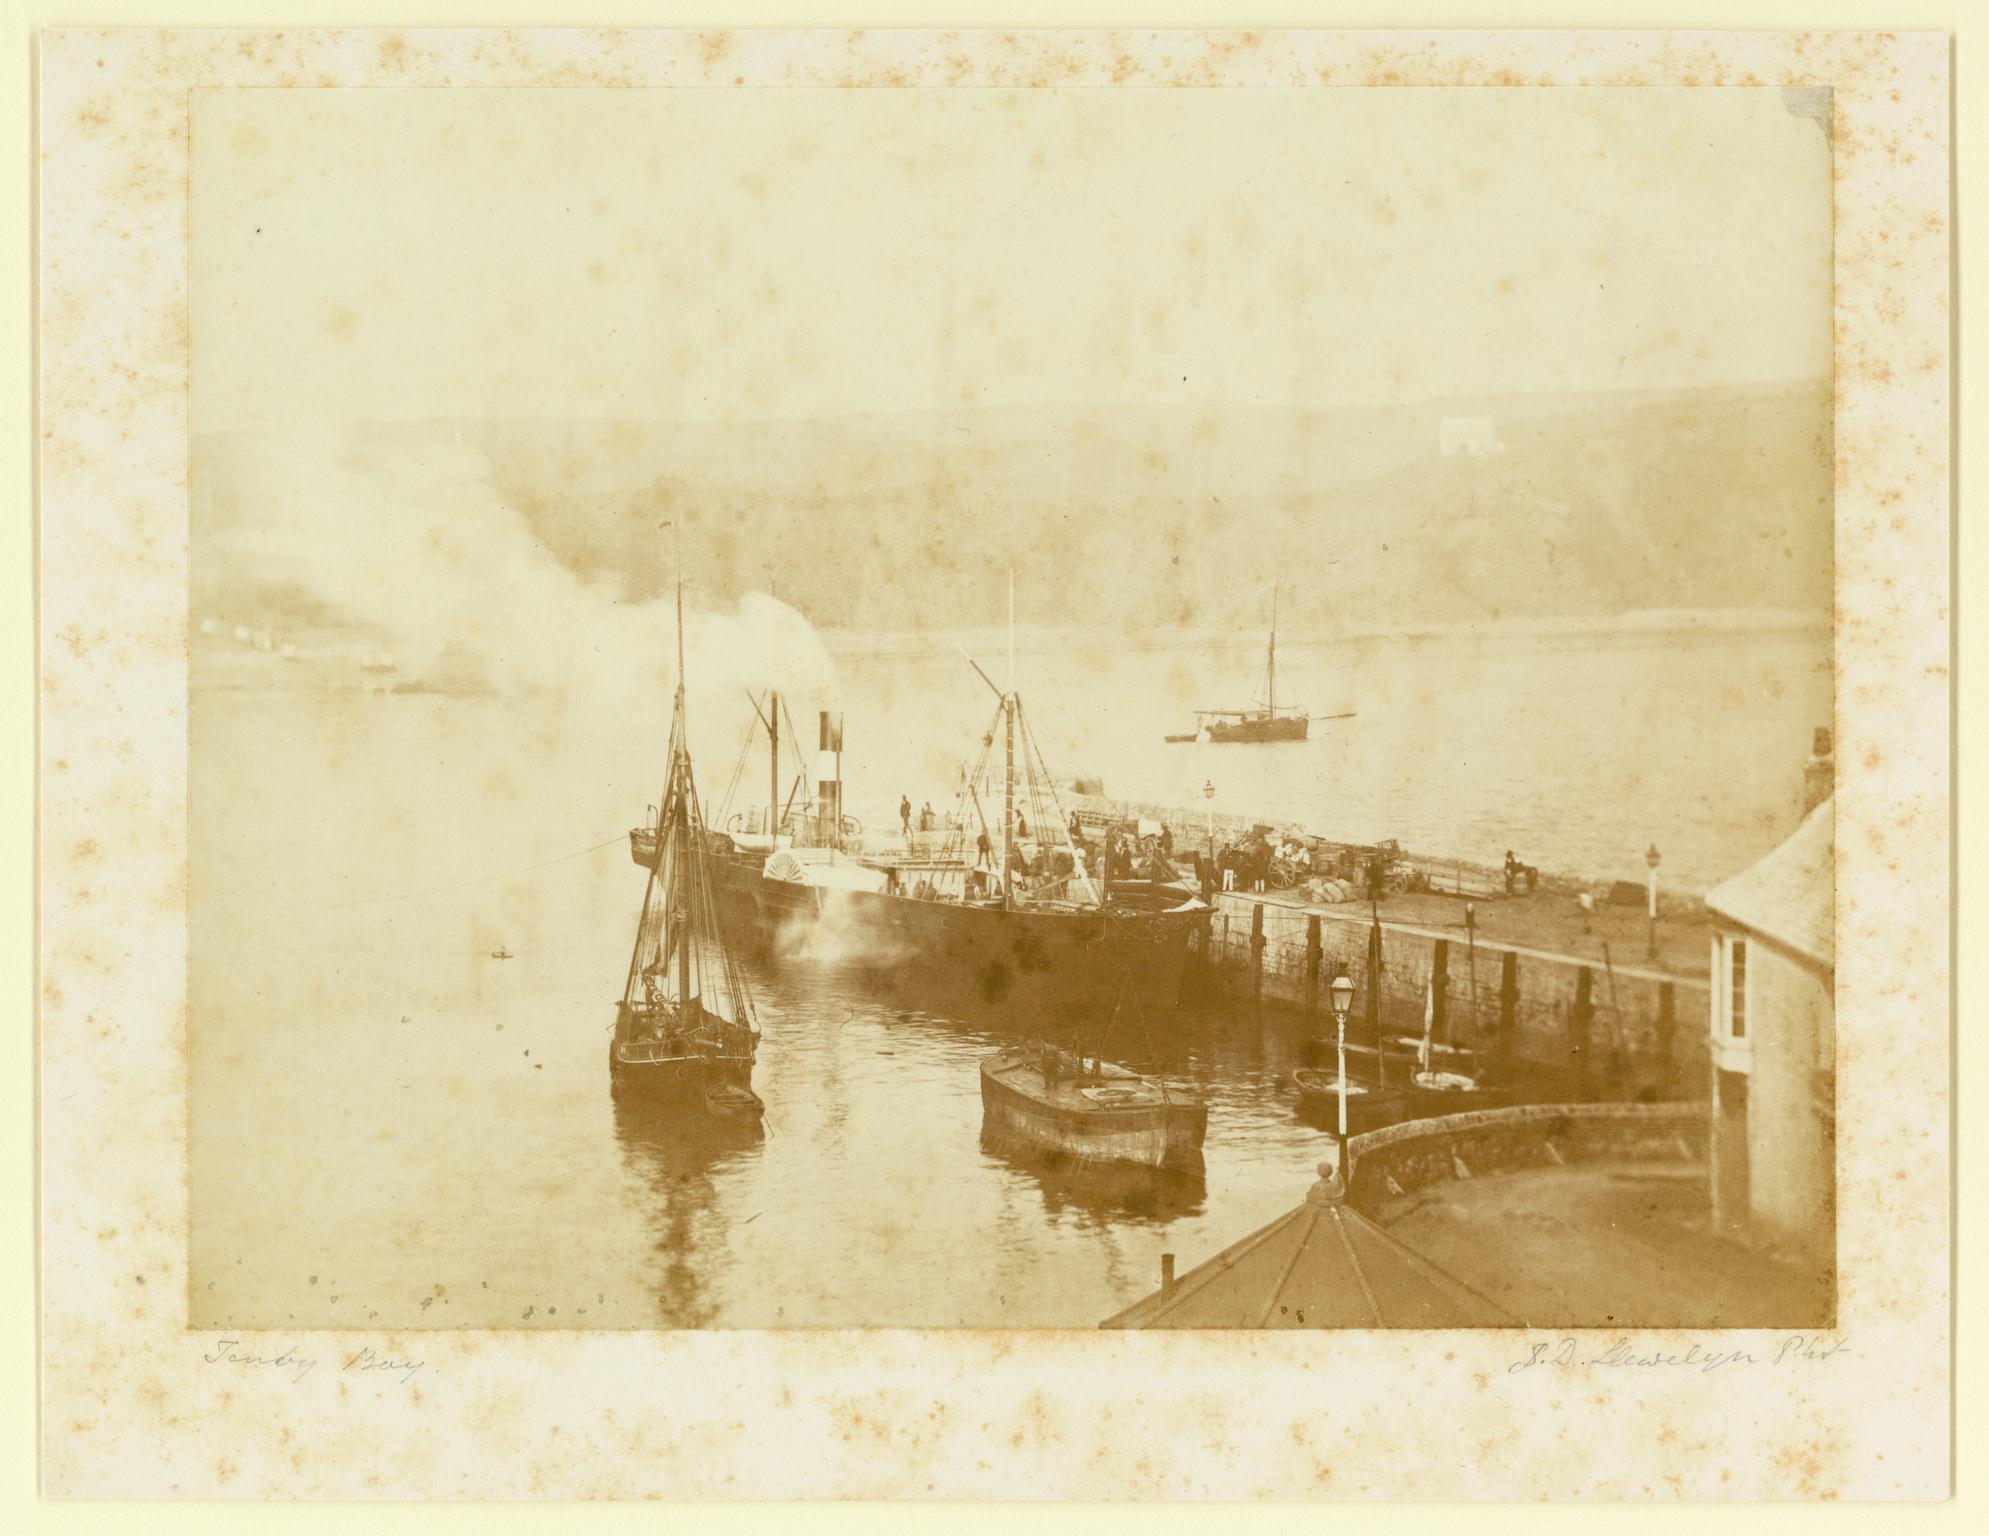 The Juno blowing off steam at Tenby (photograph)